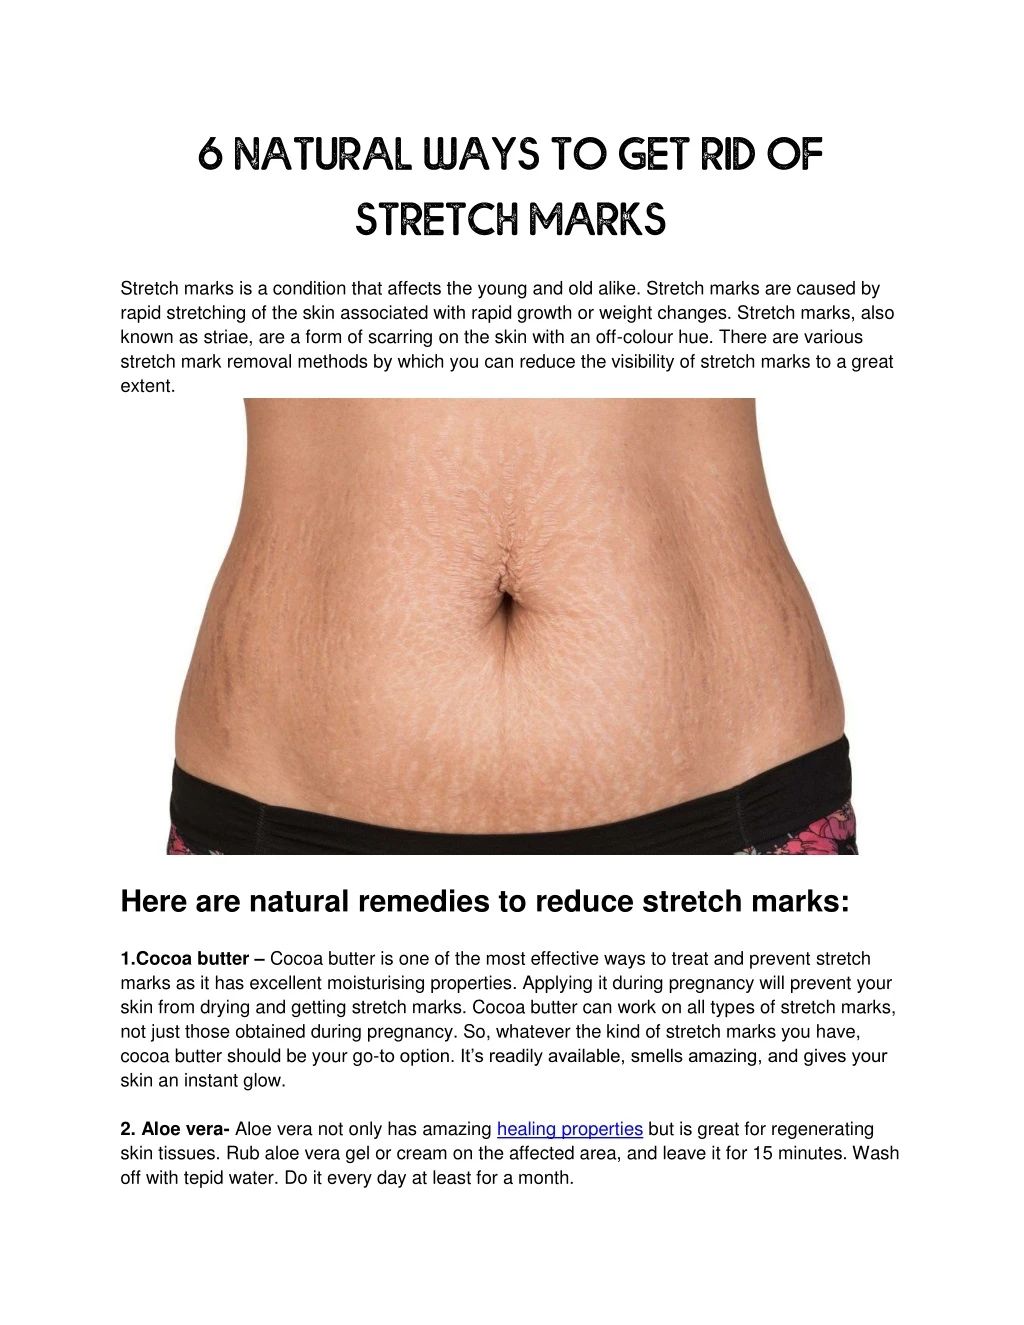 6 natural ways to get rid of stretch marks